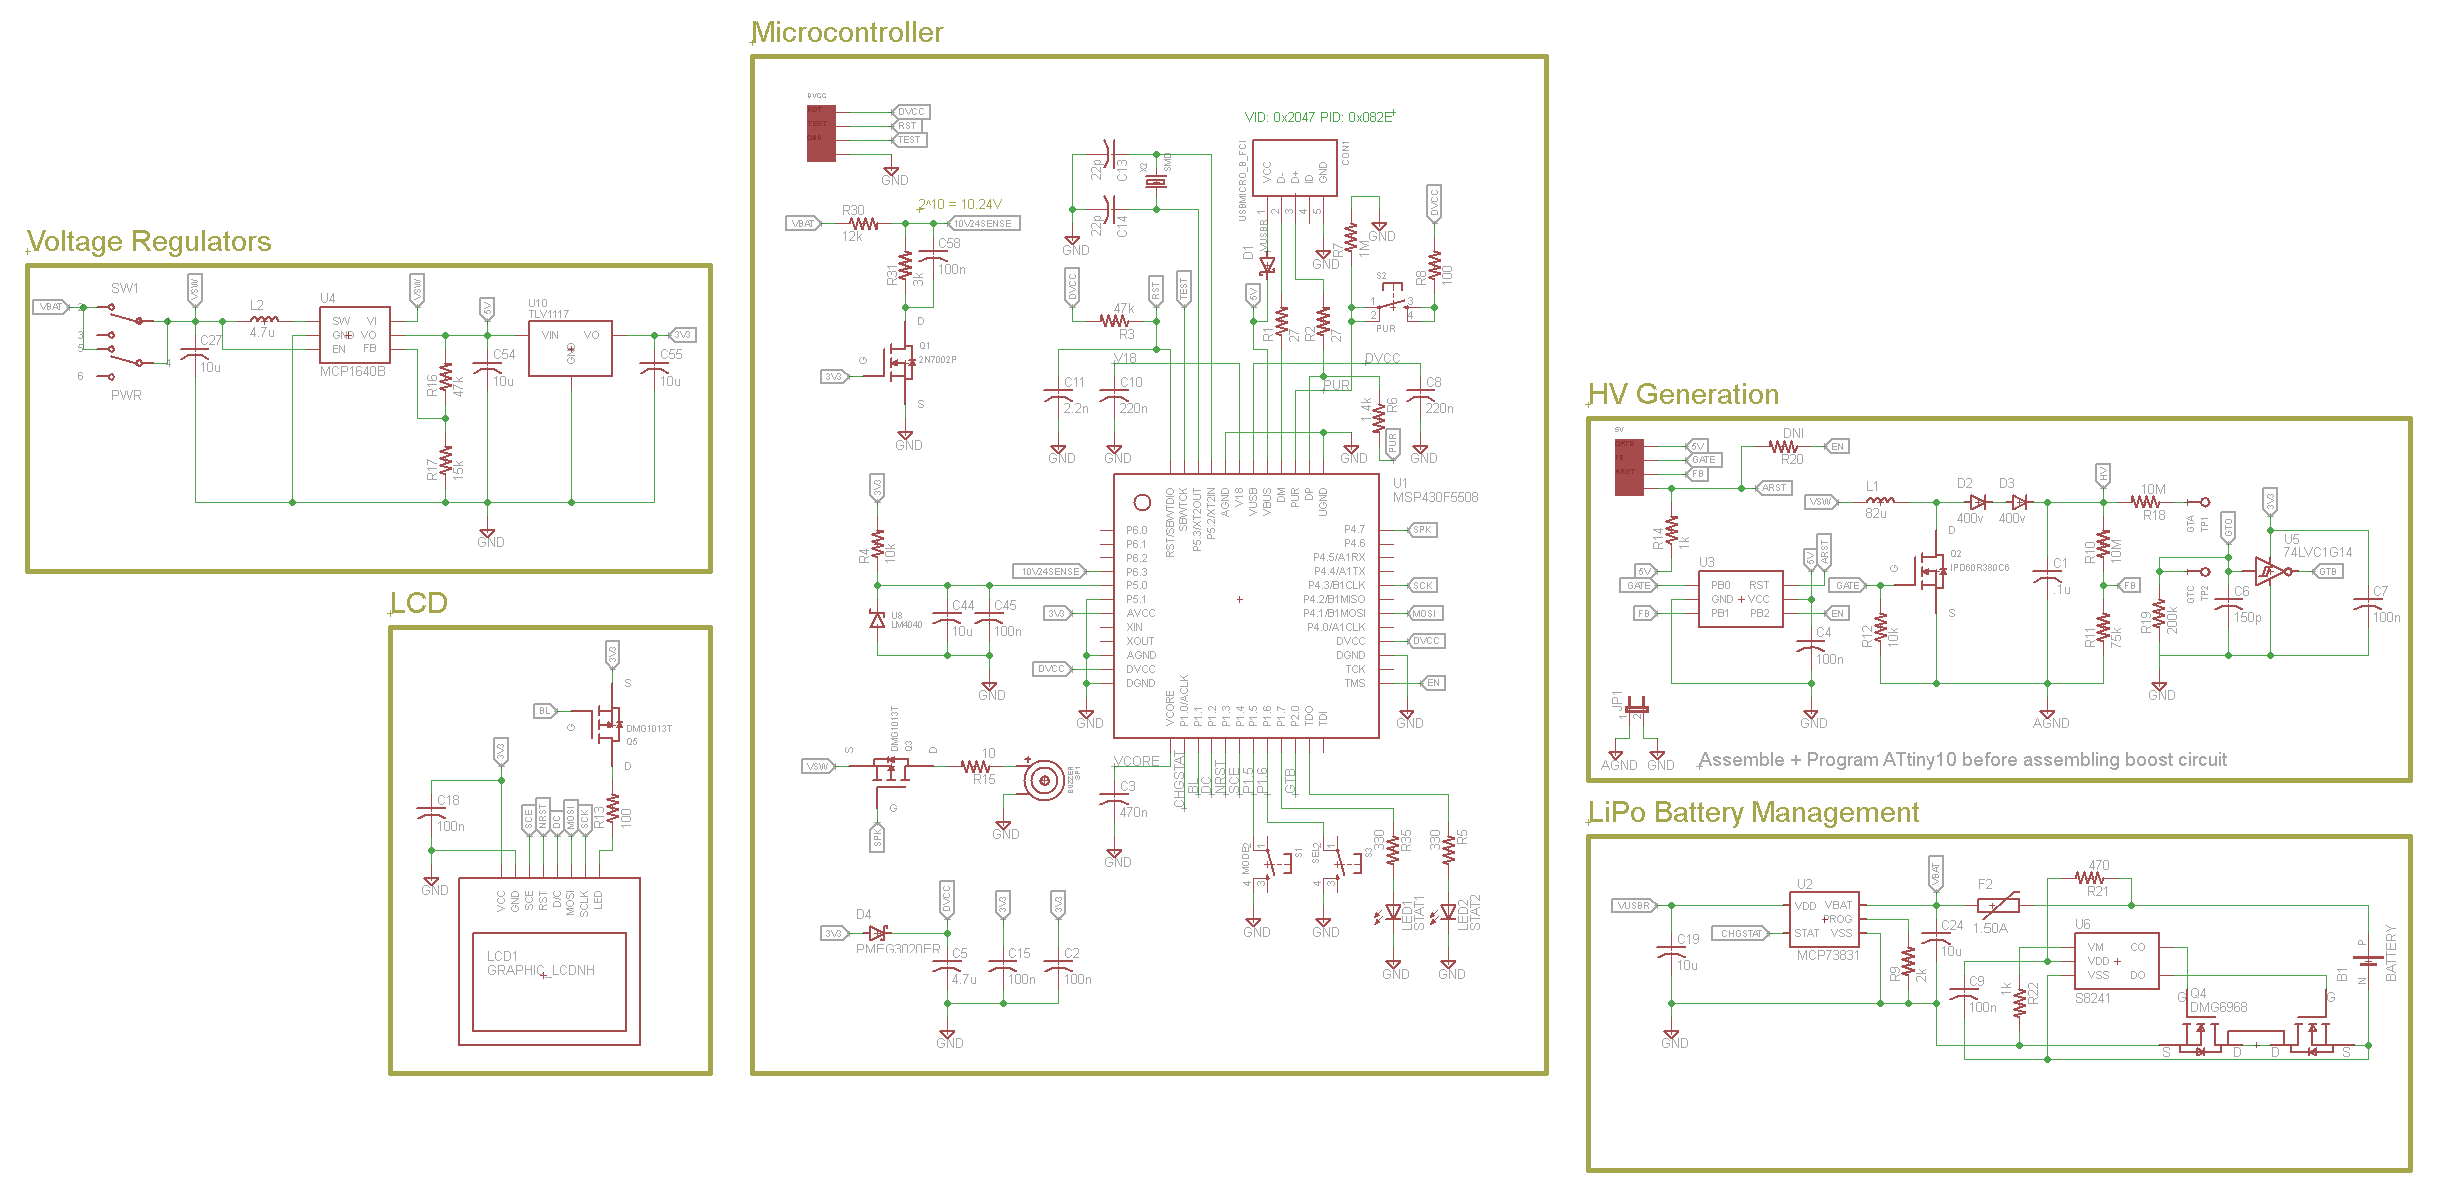 File:GC-D 1000 Schematic v1.1.png